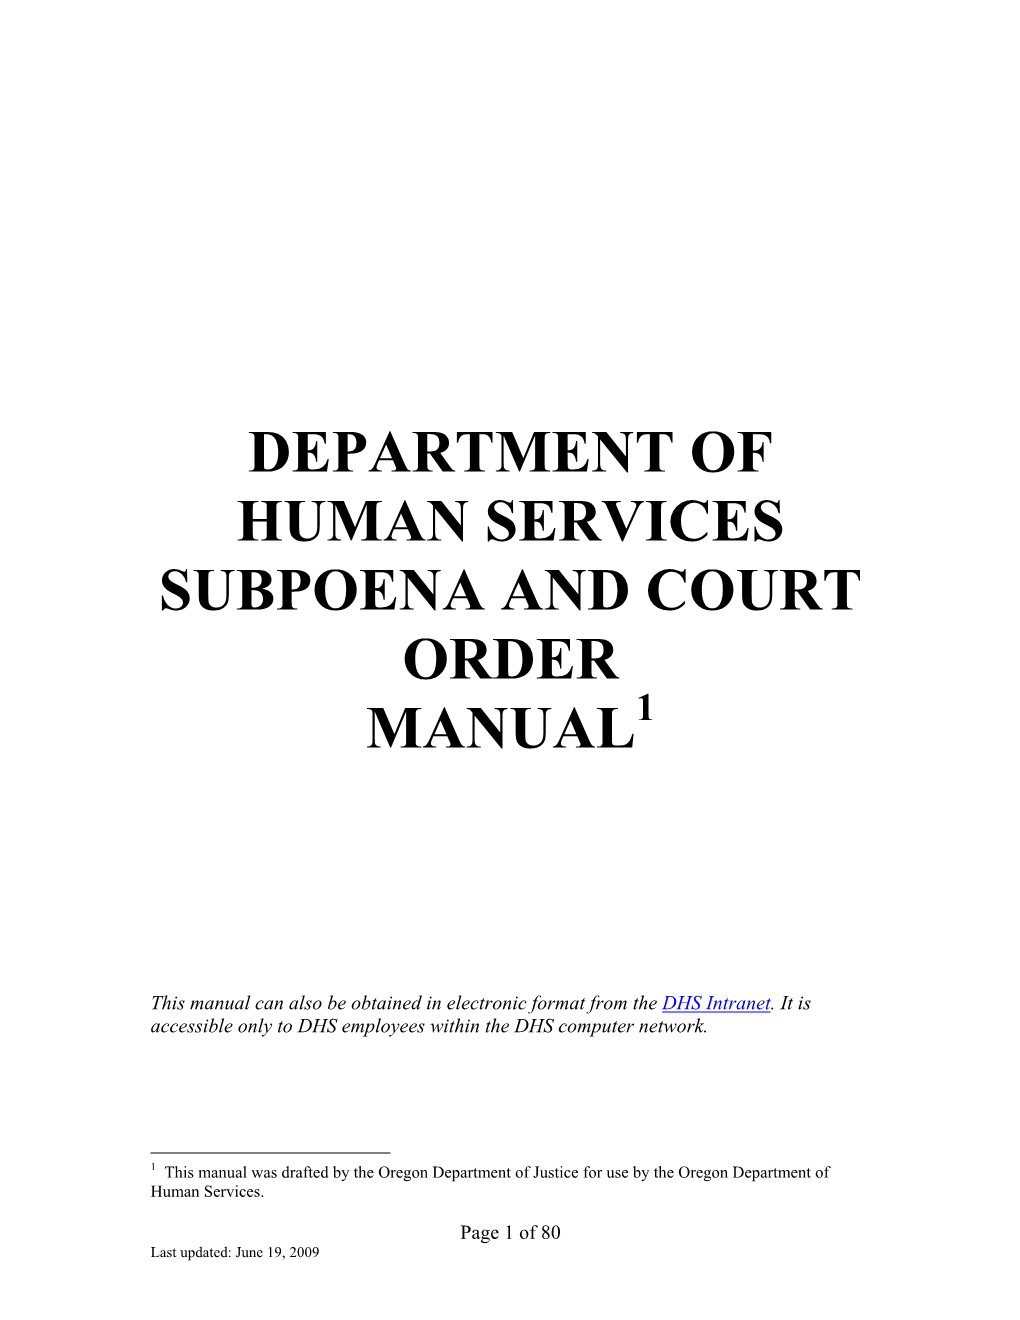 DHS Subpoena and Court Order Manual